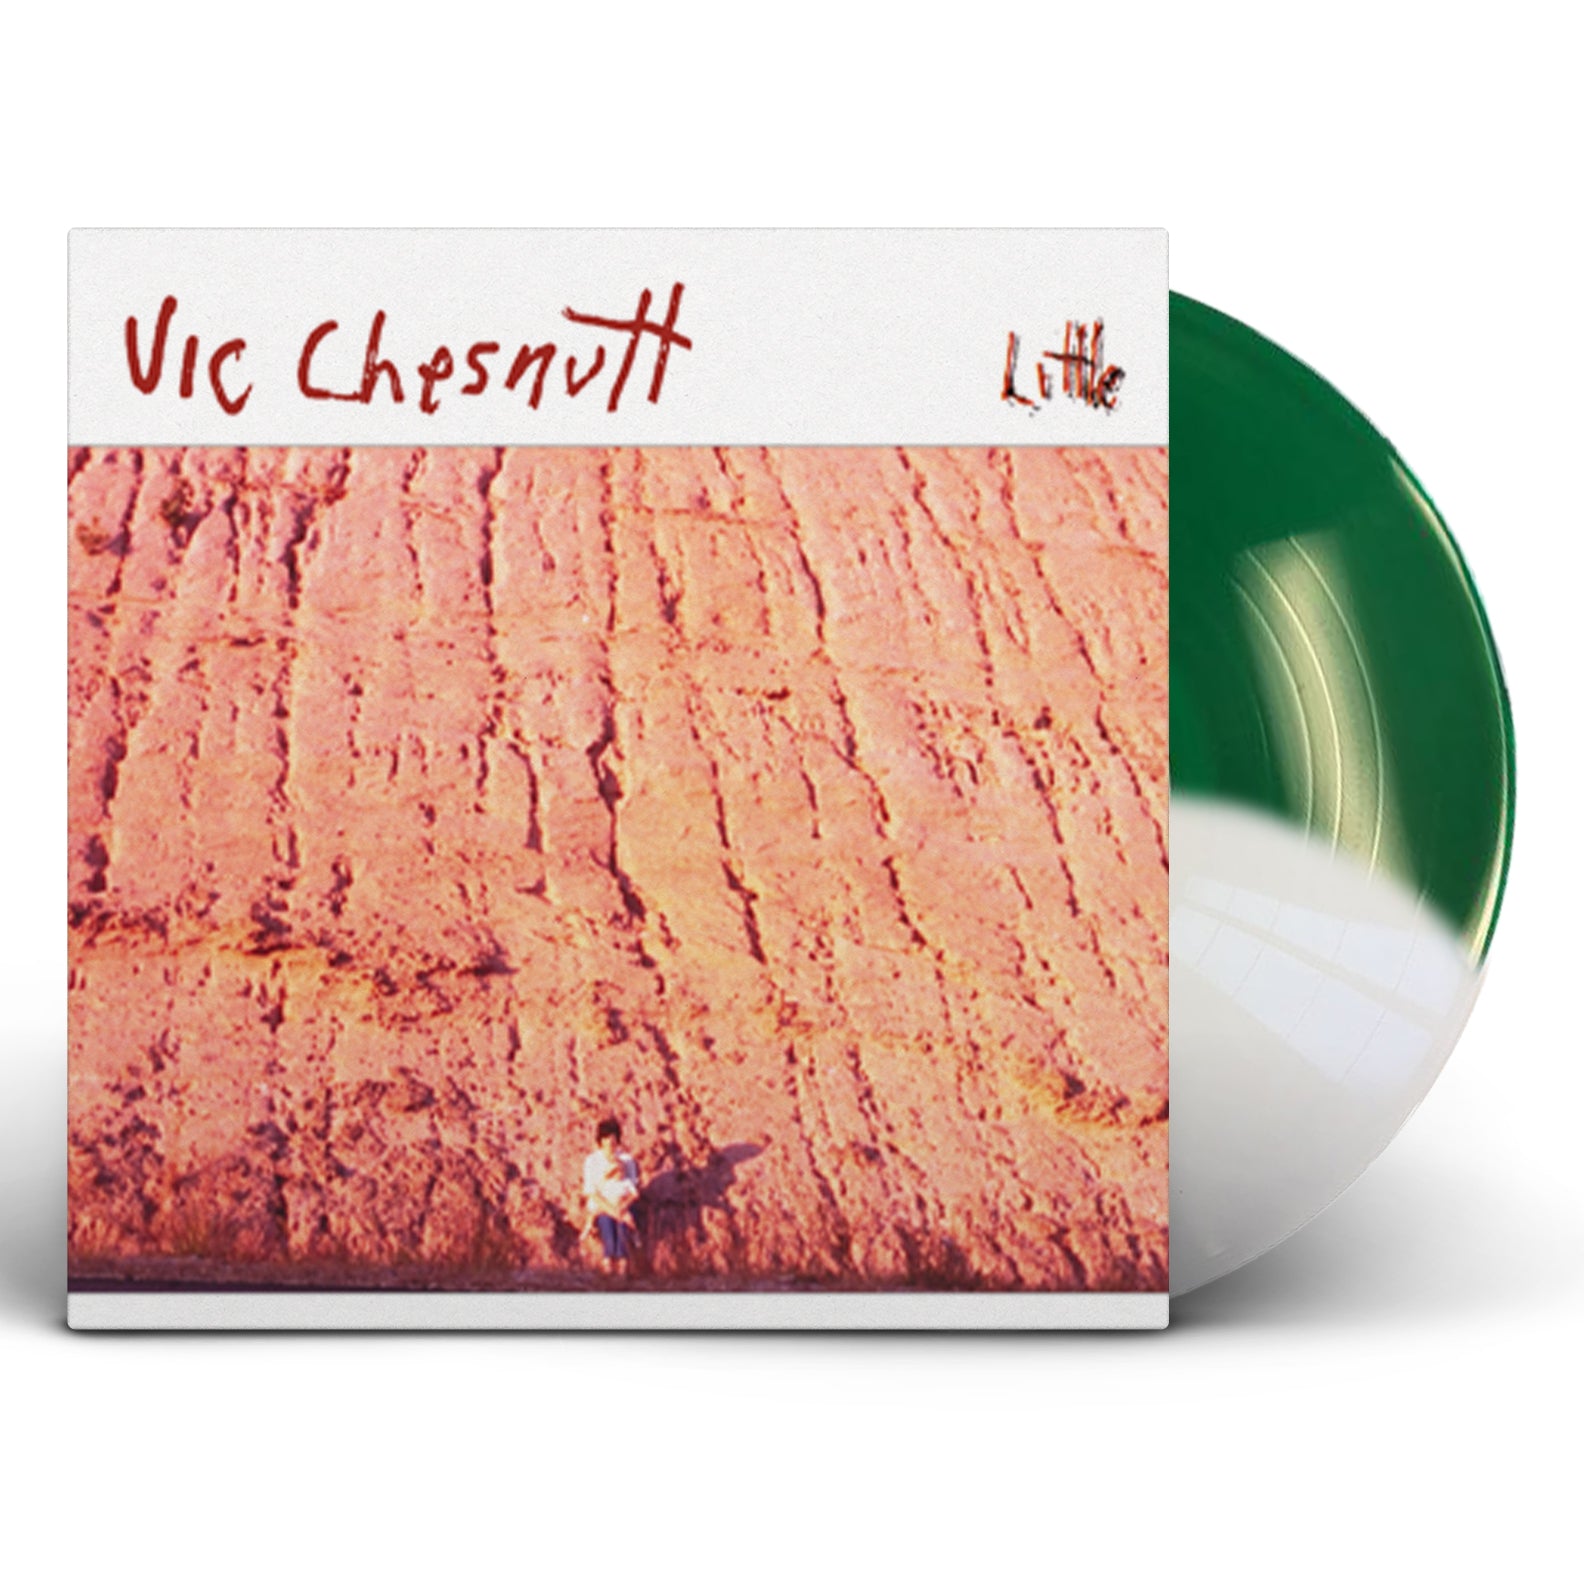 Vic Chesnutt - Little [Limited Edition Color Vinyl]